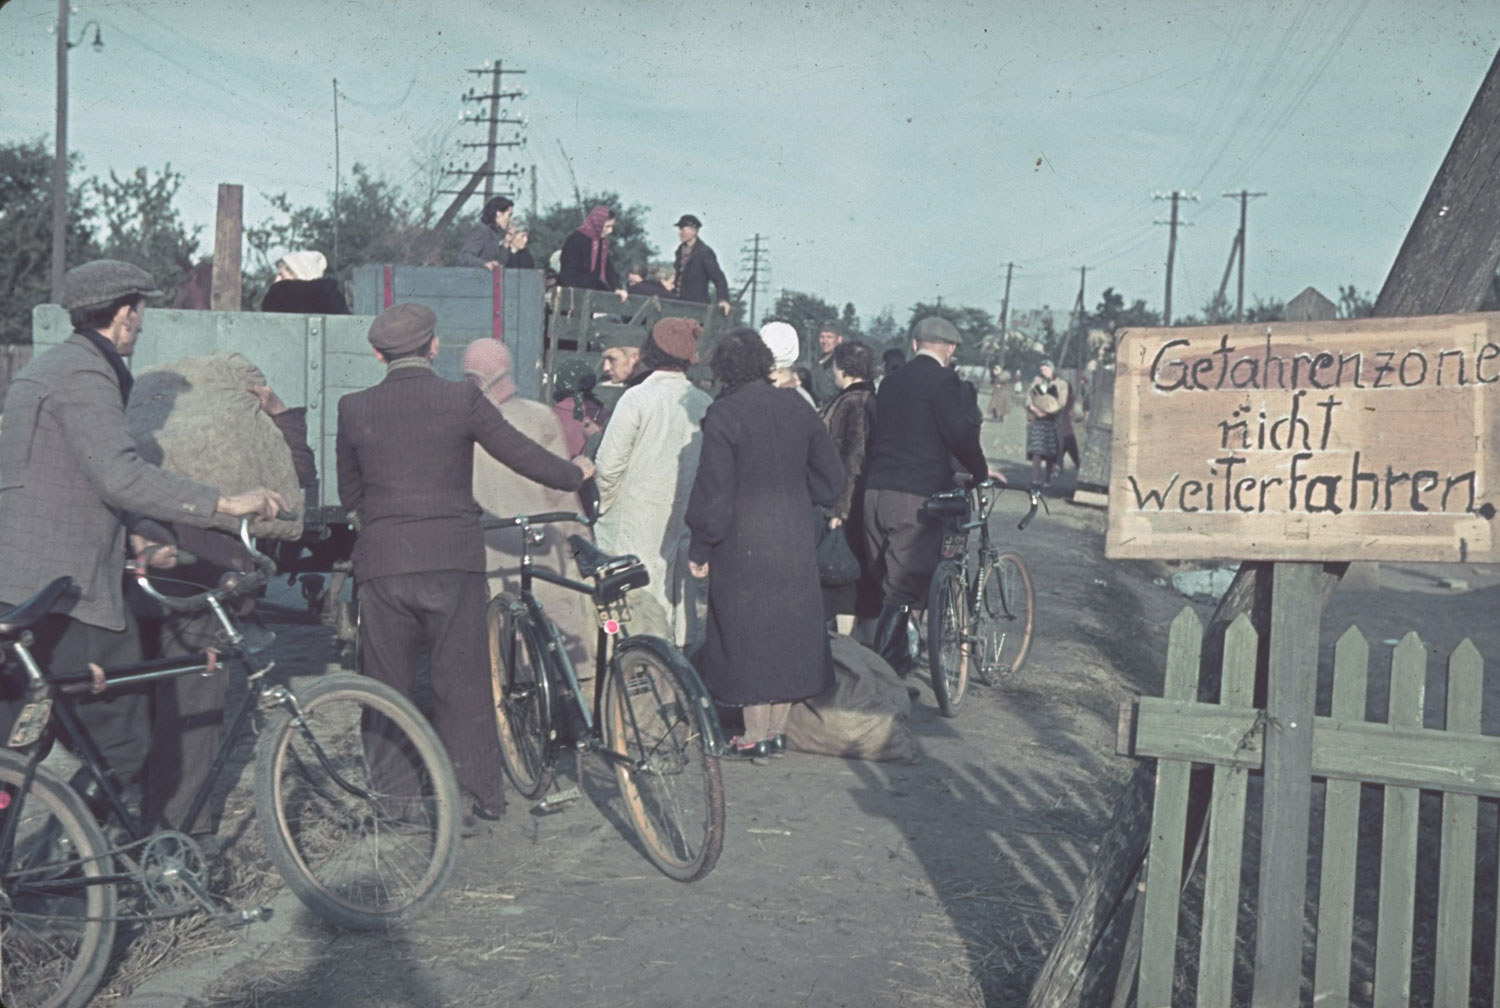 Warsaw, Nazi-occupied Poland, 1940. The sign warns: "Danger zone, do not proceed."